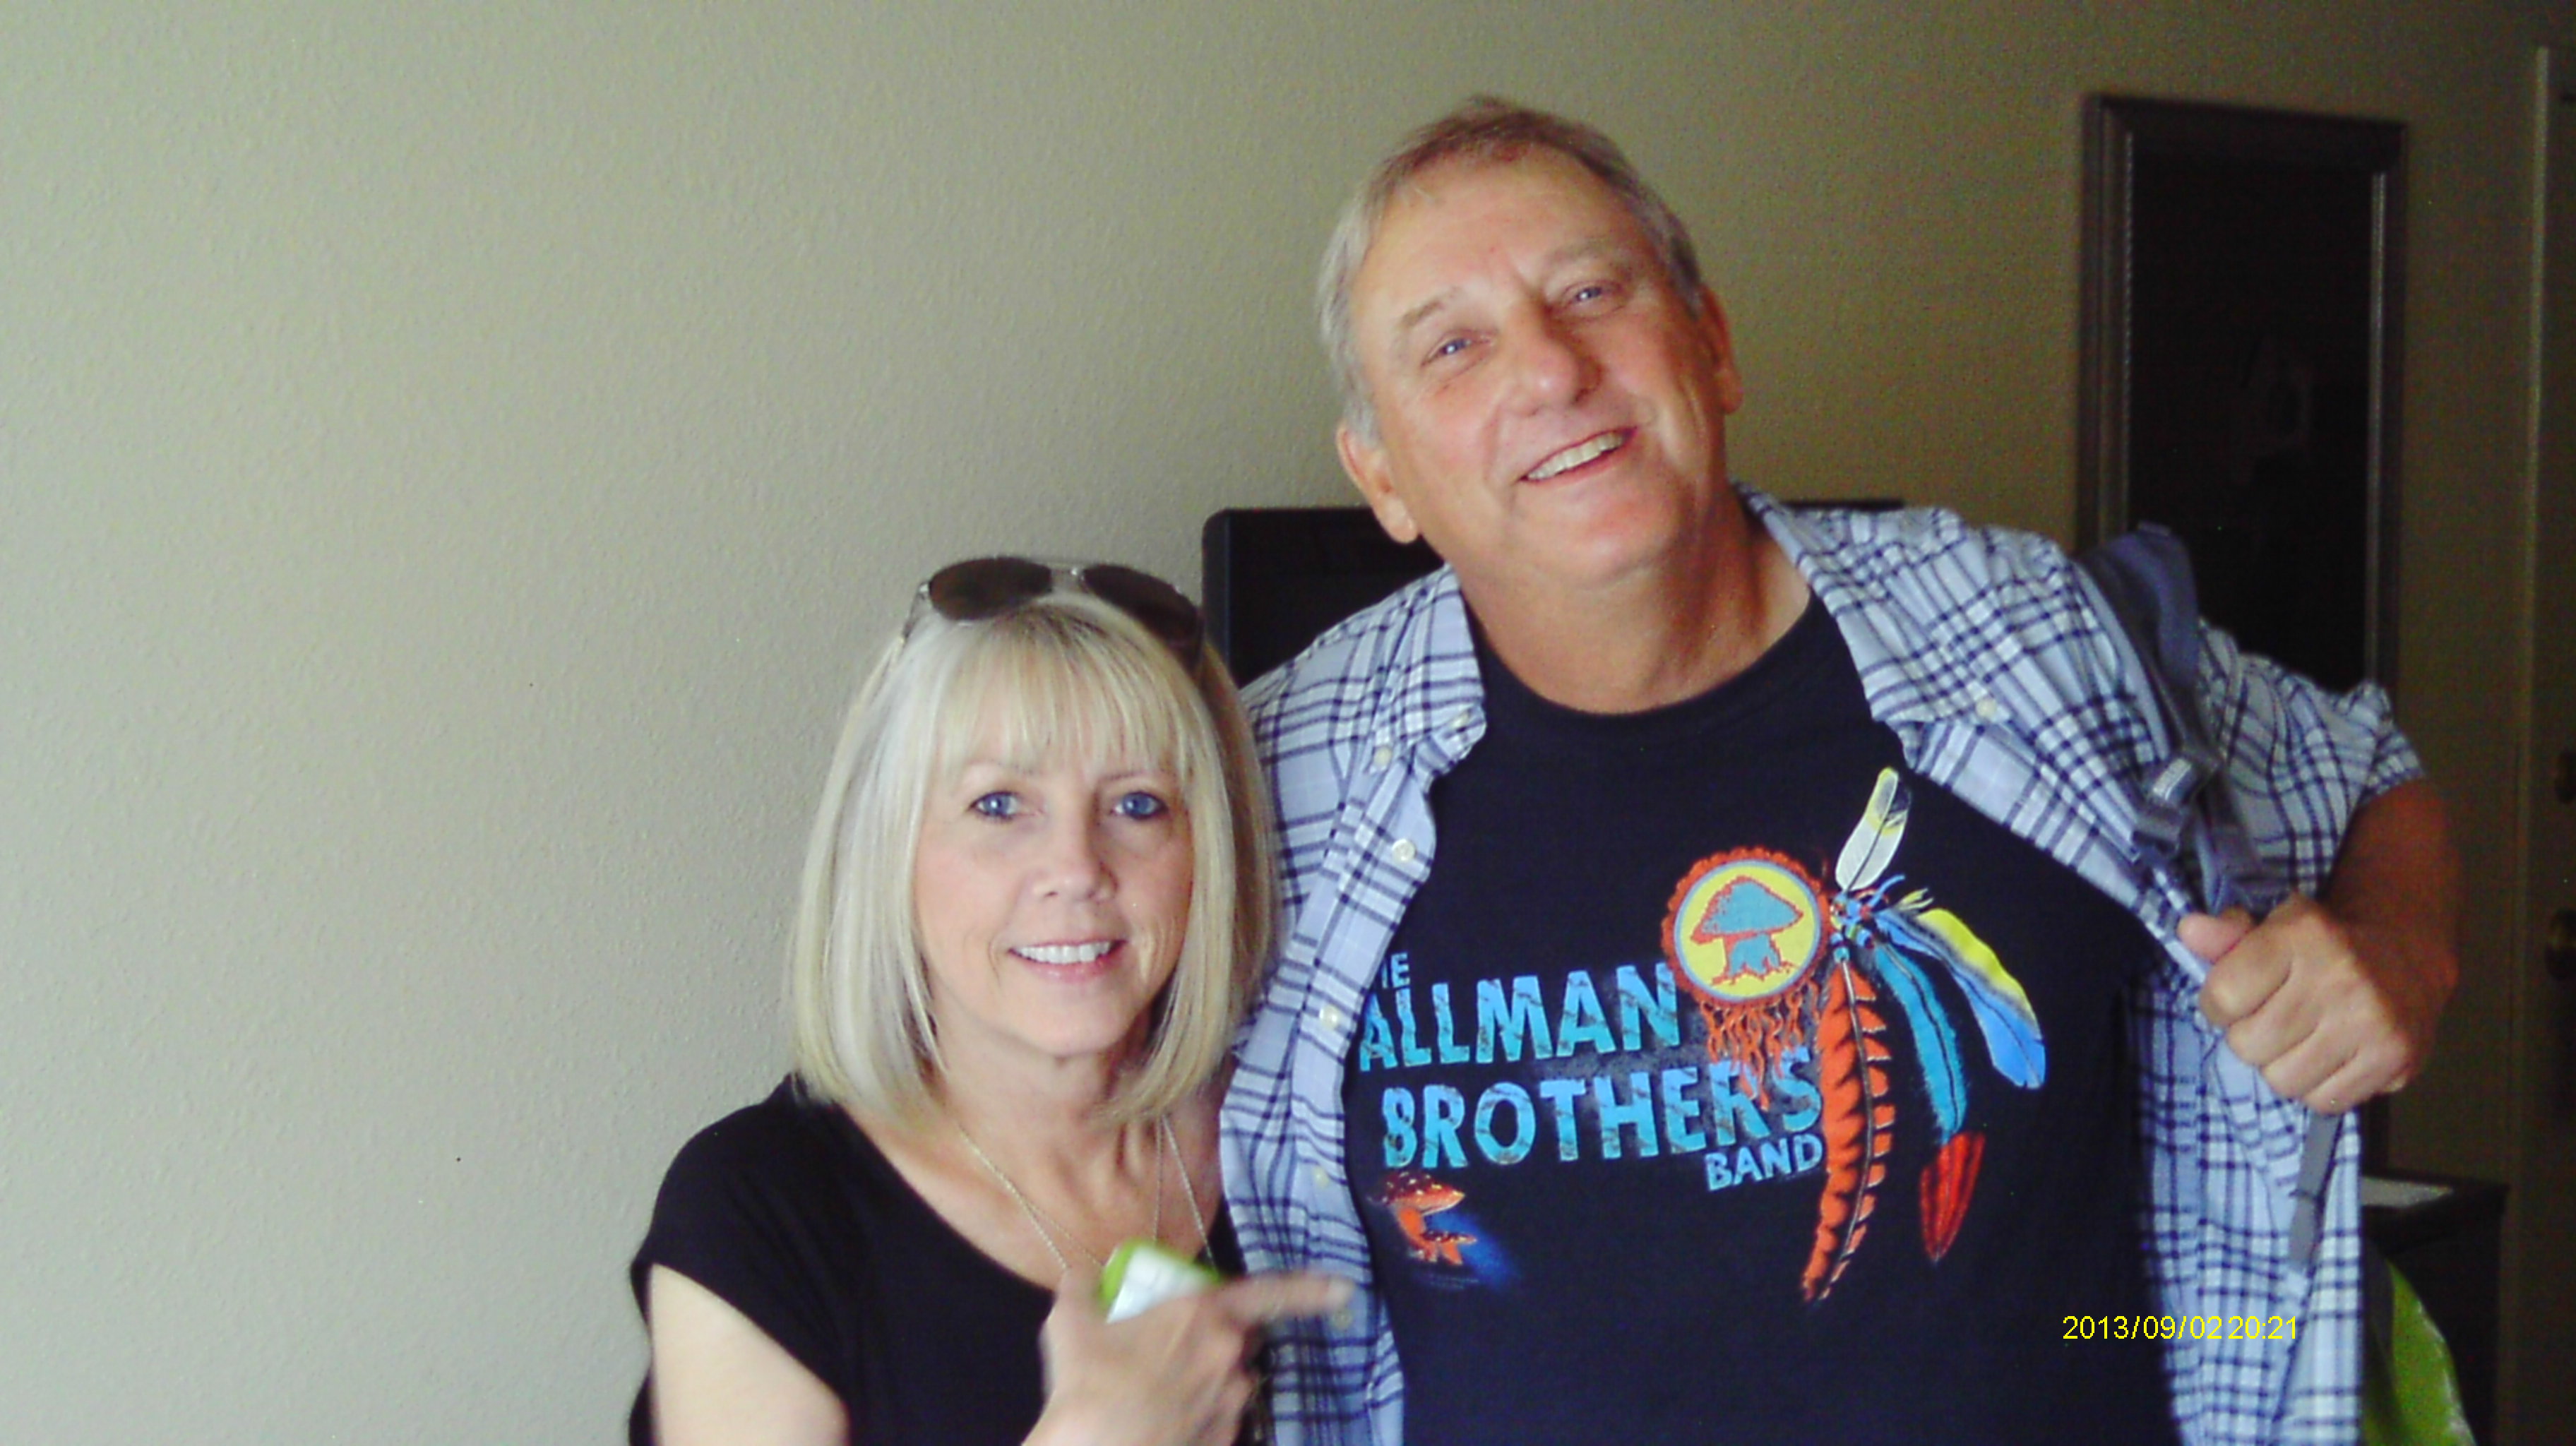 This my brother and friend Mickie before the Labor Day Show 9-2-13.  I gave him the shirt he is wearing, that I bought 30 years ago. Ted drove 9 hours to my house in Georgia to hear the ABB. We felt like we did in the early years.  